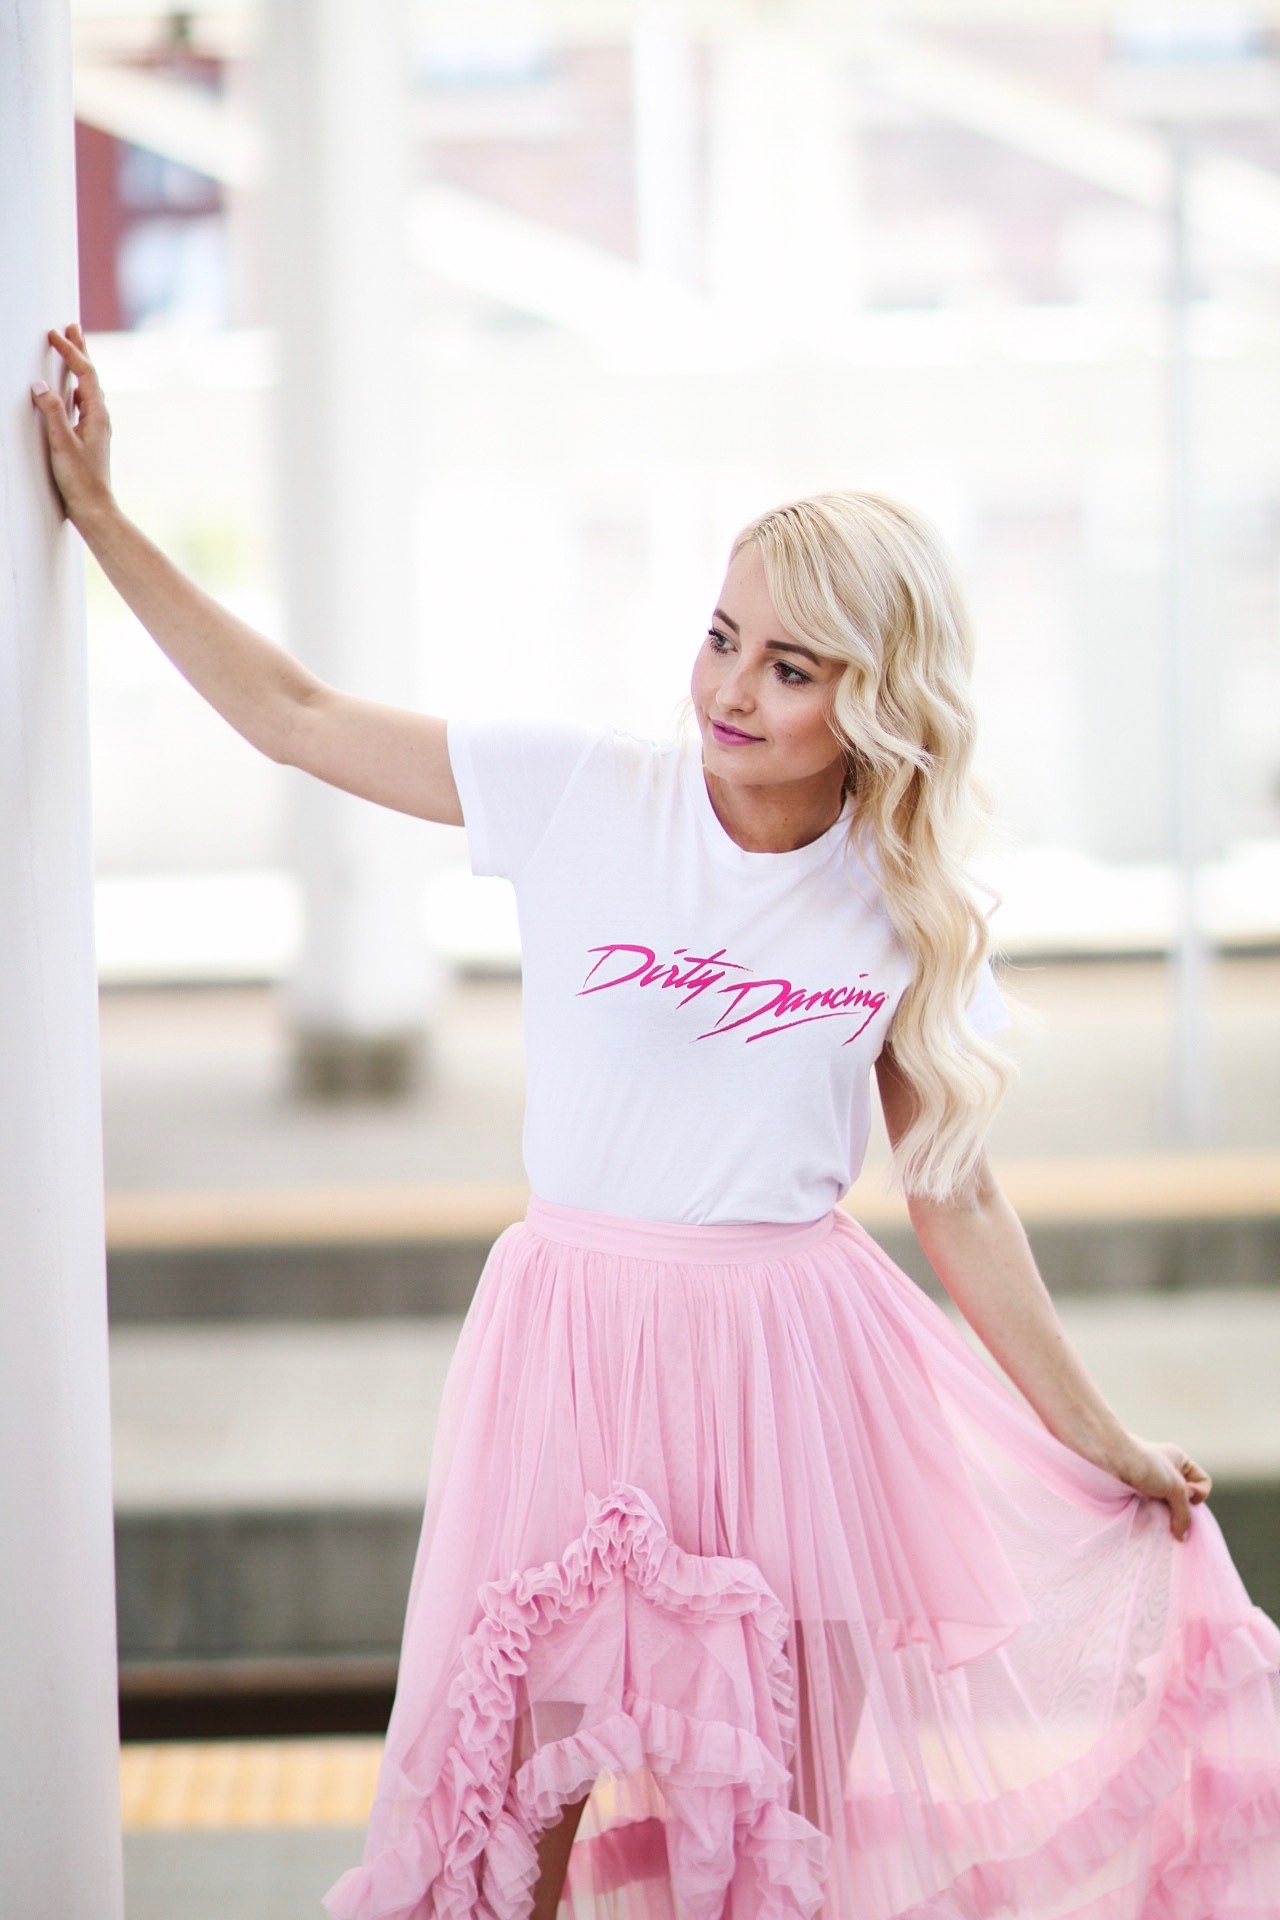 Alena Gidenko of modaprints.com styles a pink tulle skirt from ASOS and for the top a simple dirty dancing tee